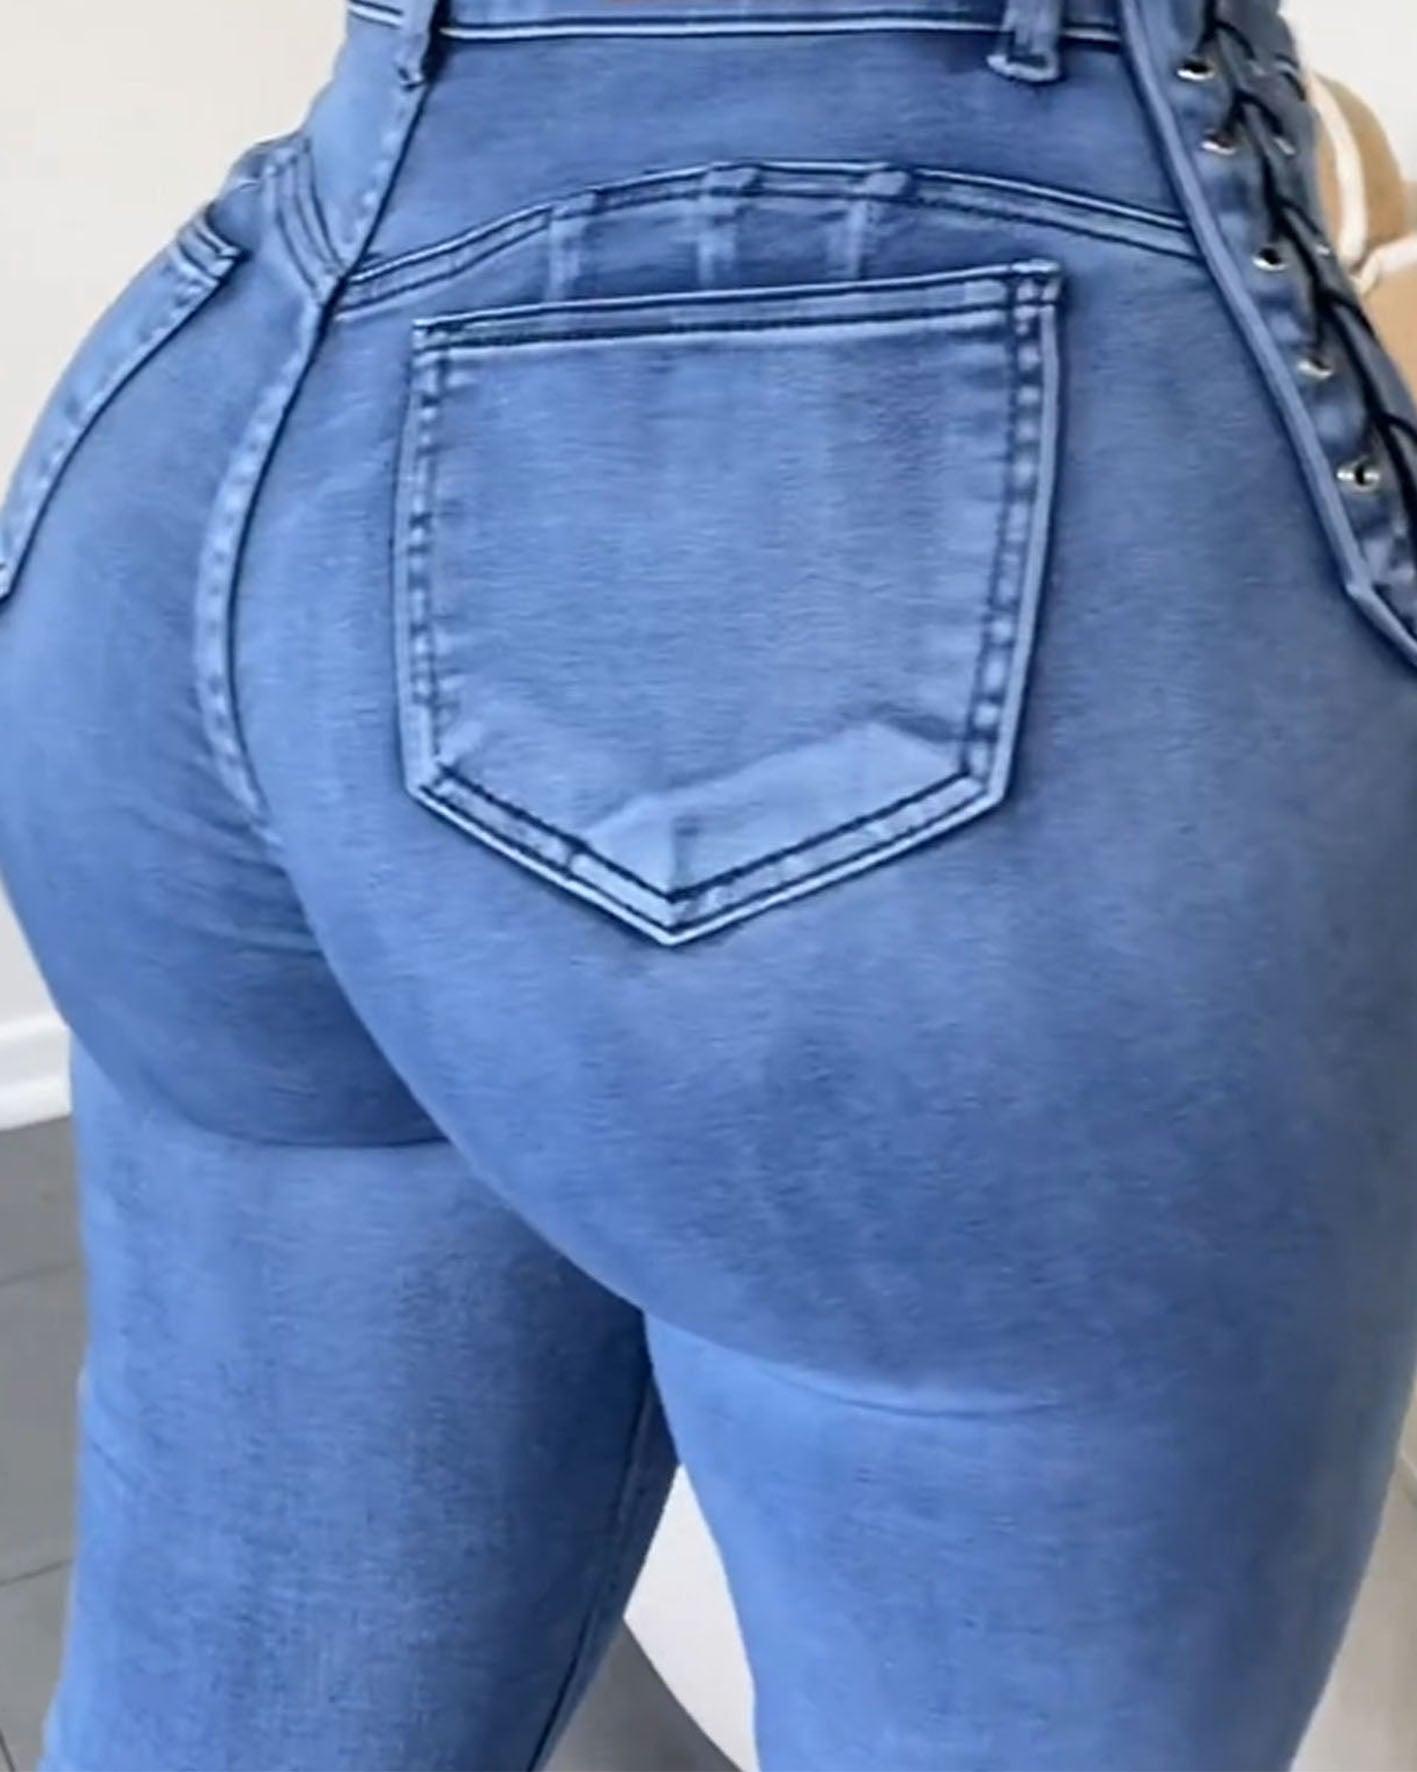 Tight, High-Waisted Jeans - Wishe